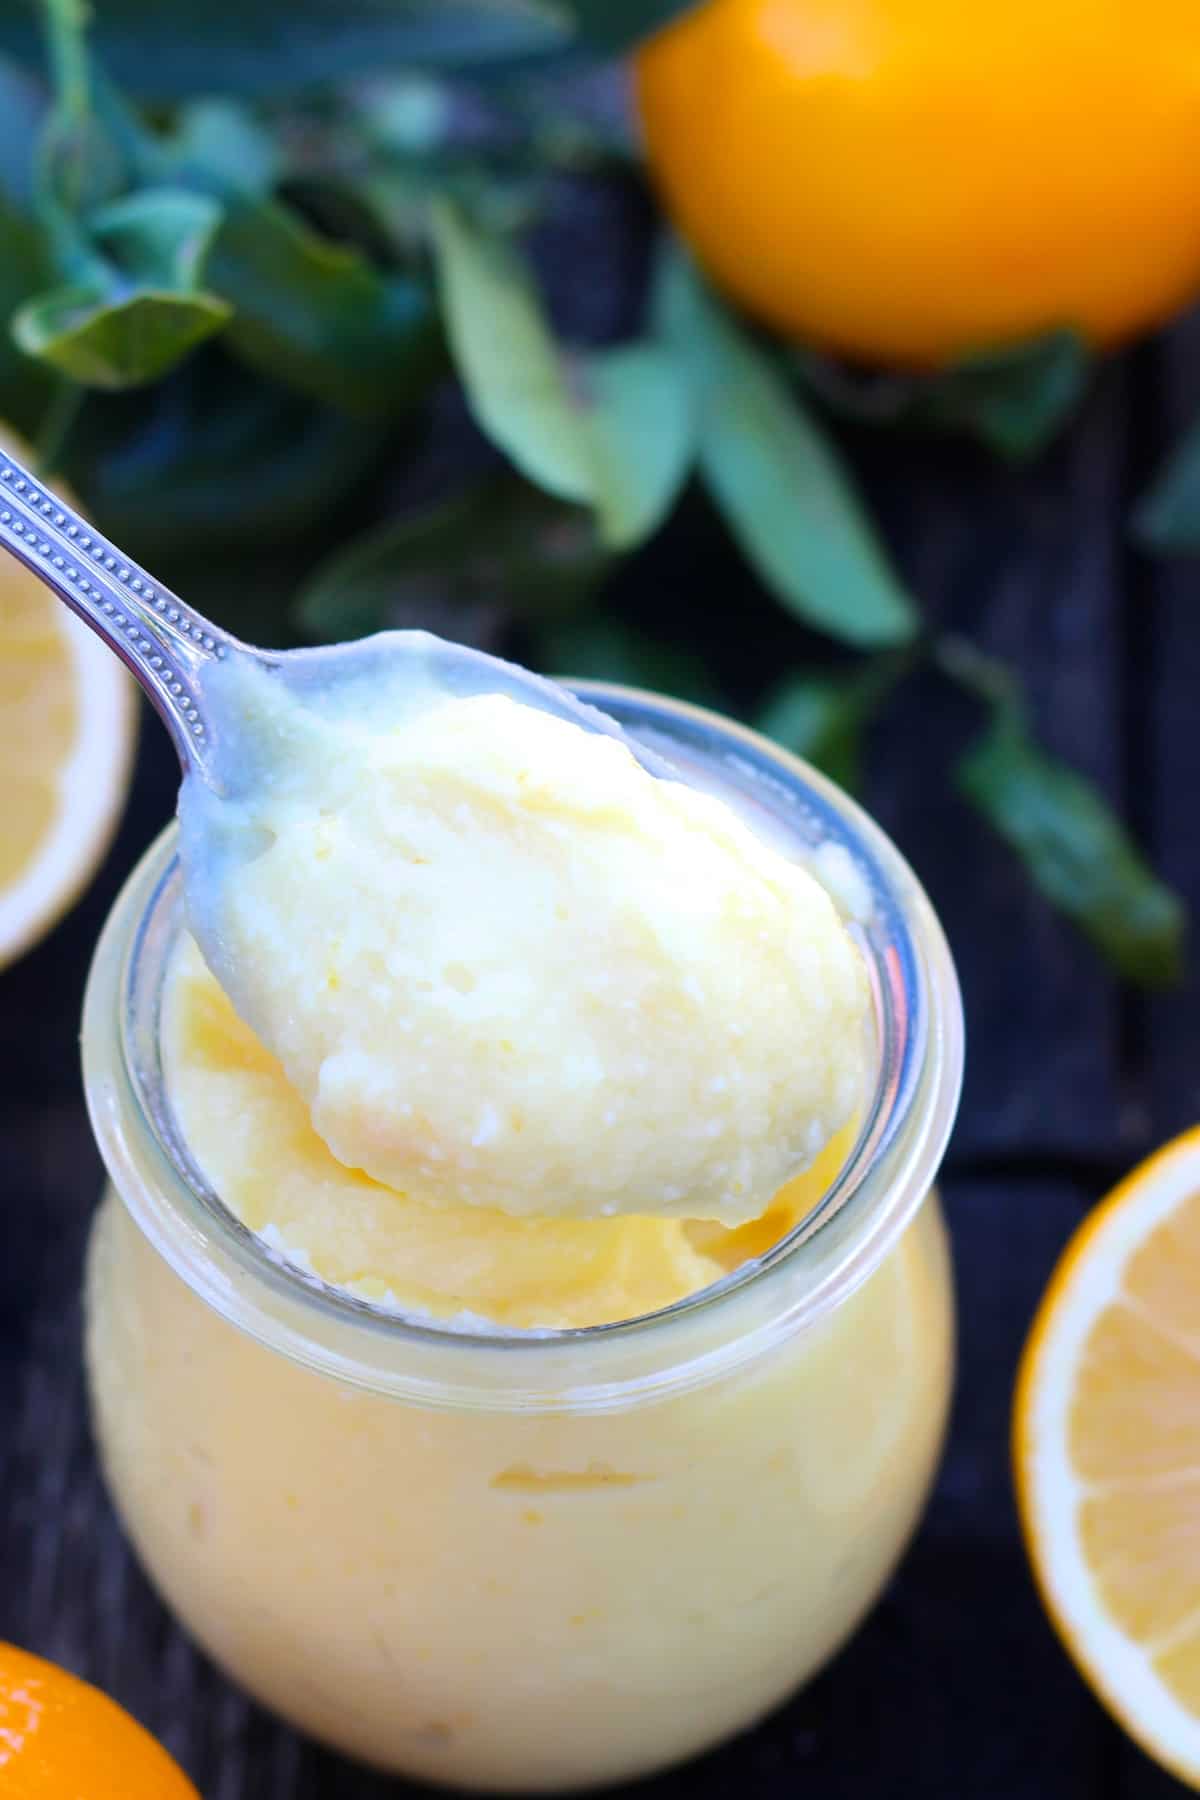 Smooth lemon curd that is slightly tangy and deliciously sweet